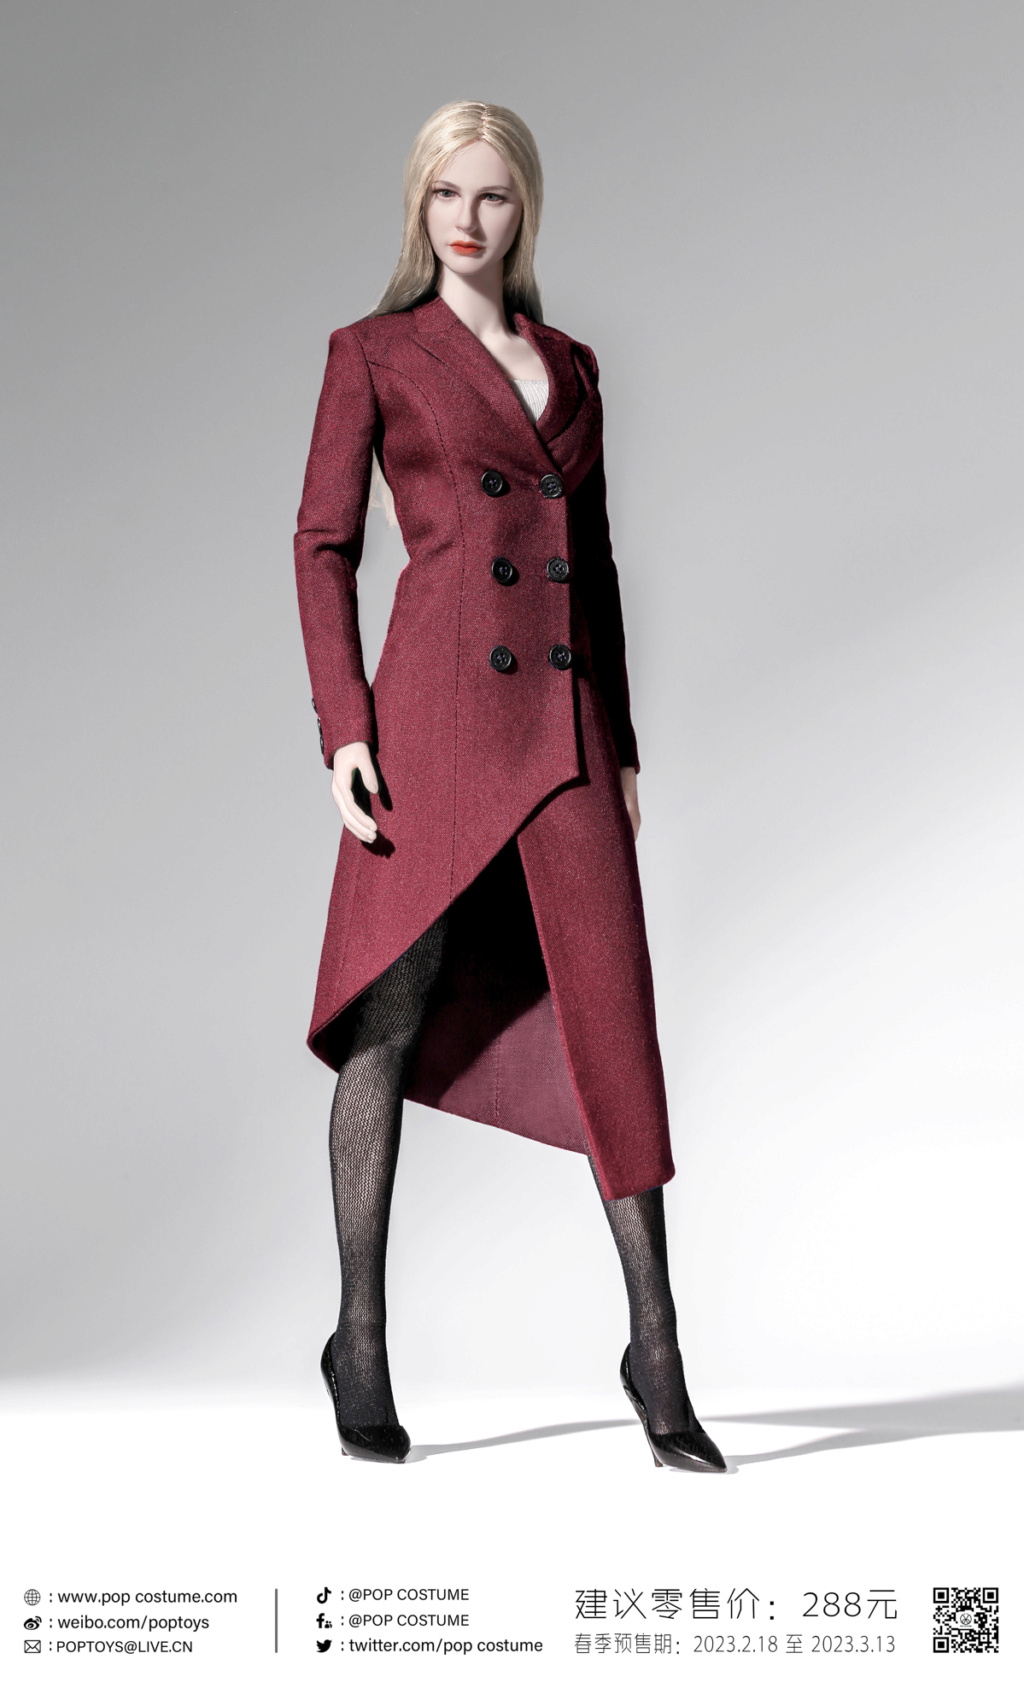 Clothing - NEW PRODUCT: POP Toys: X38 1/6 Scale Women’s coat in 3 styles 12375410